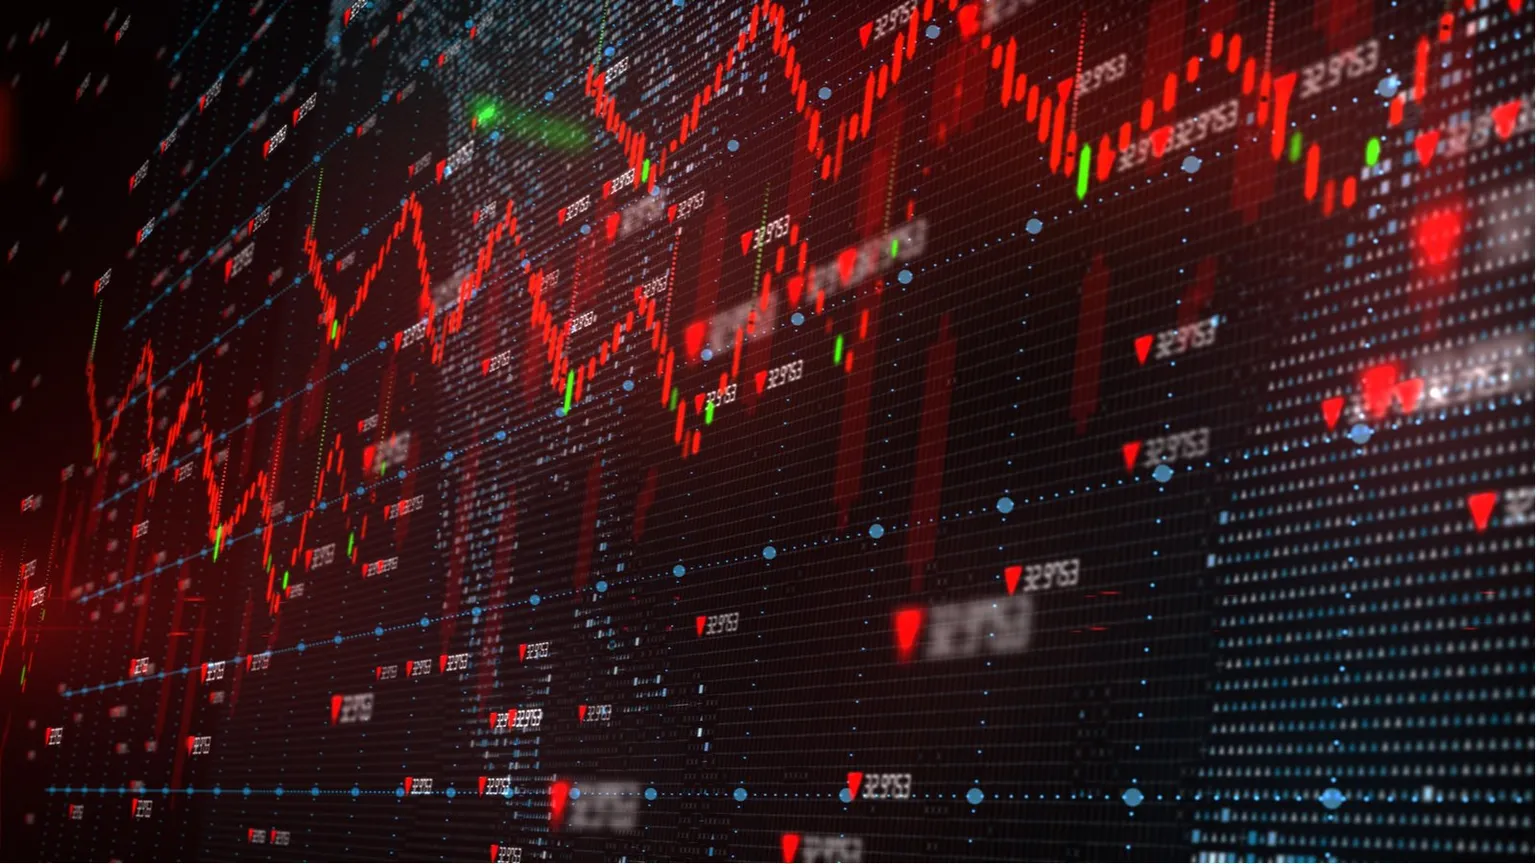 Crypto markets in the red zone. Image: Shutterstock